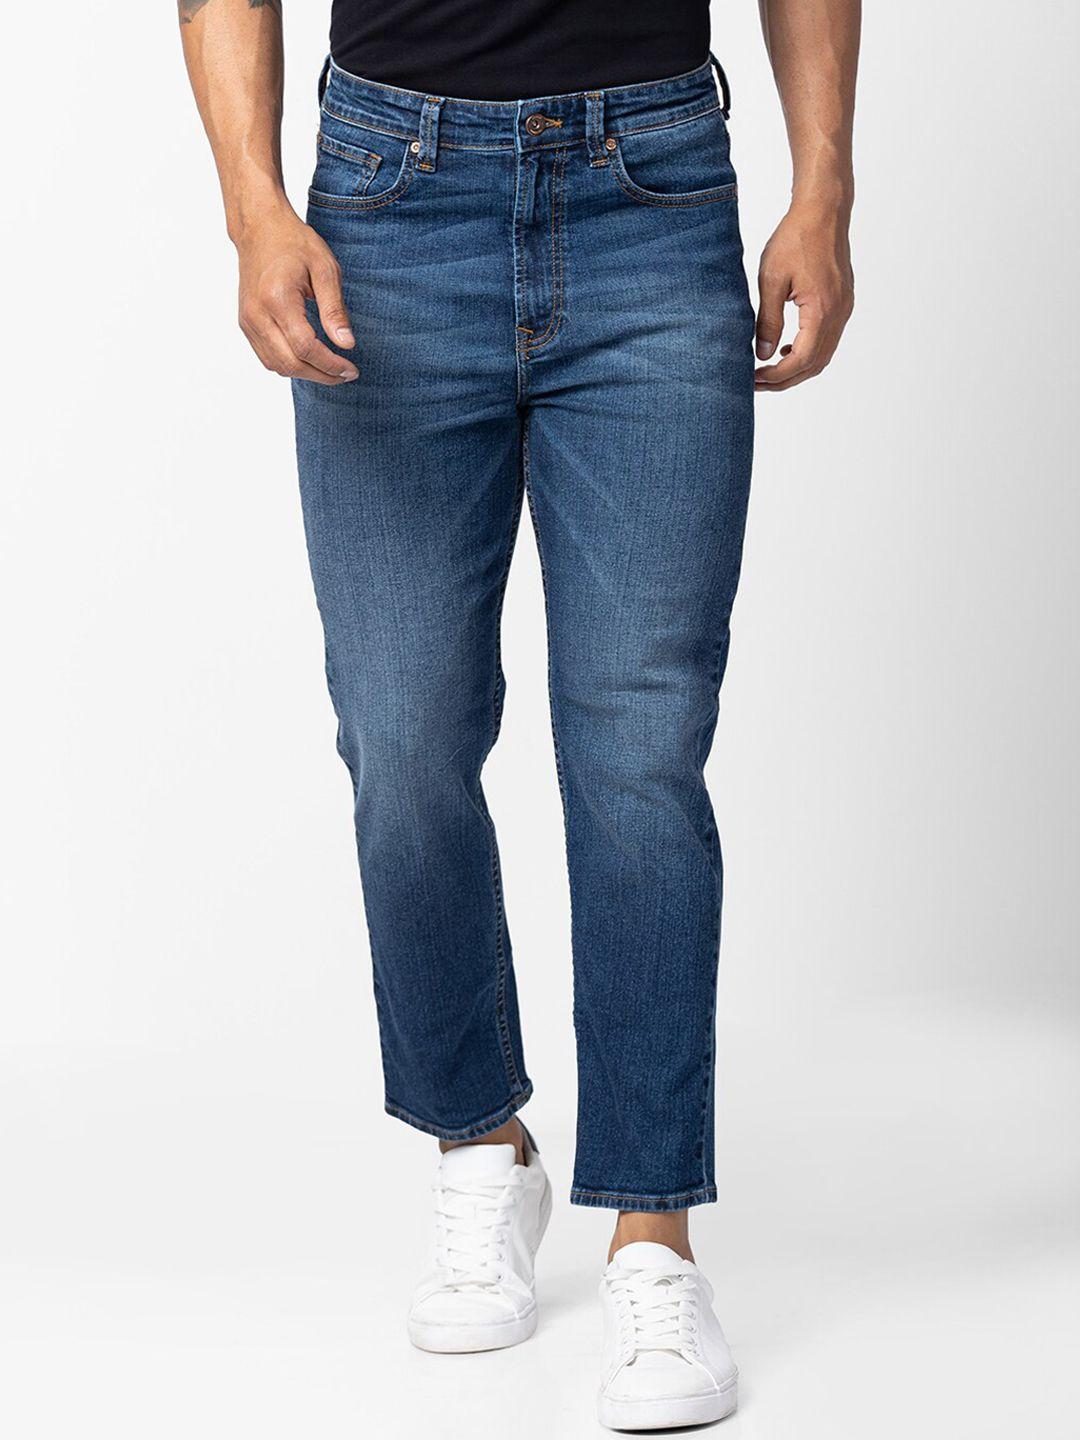 spykar-men-relaxed-fit-low-distress-light-fade-stretchable-cotton-jeans